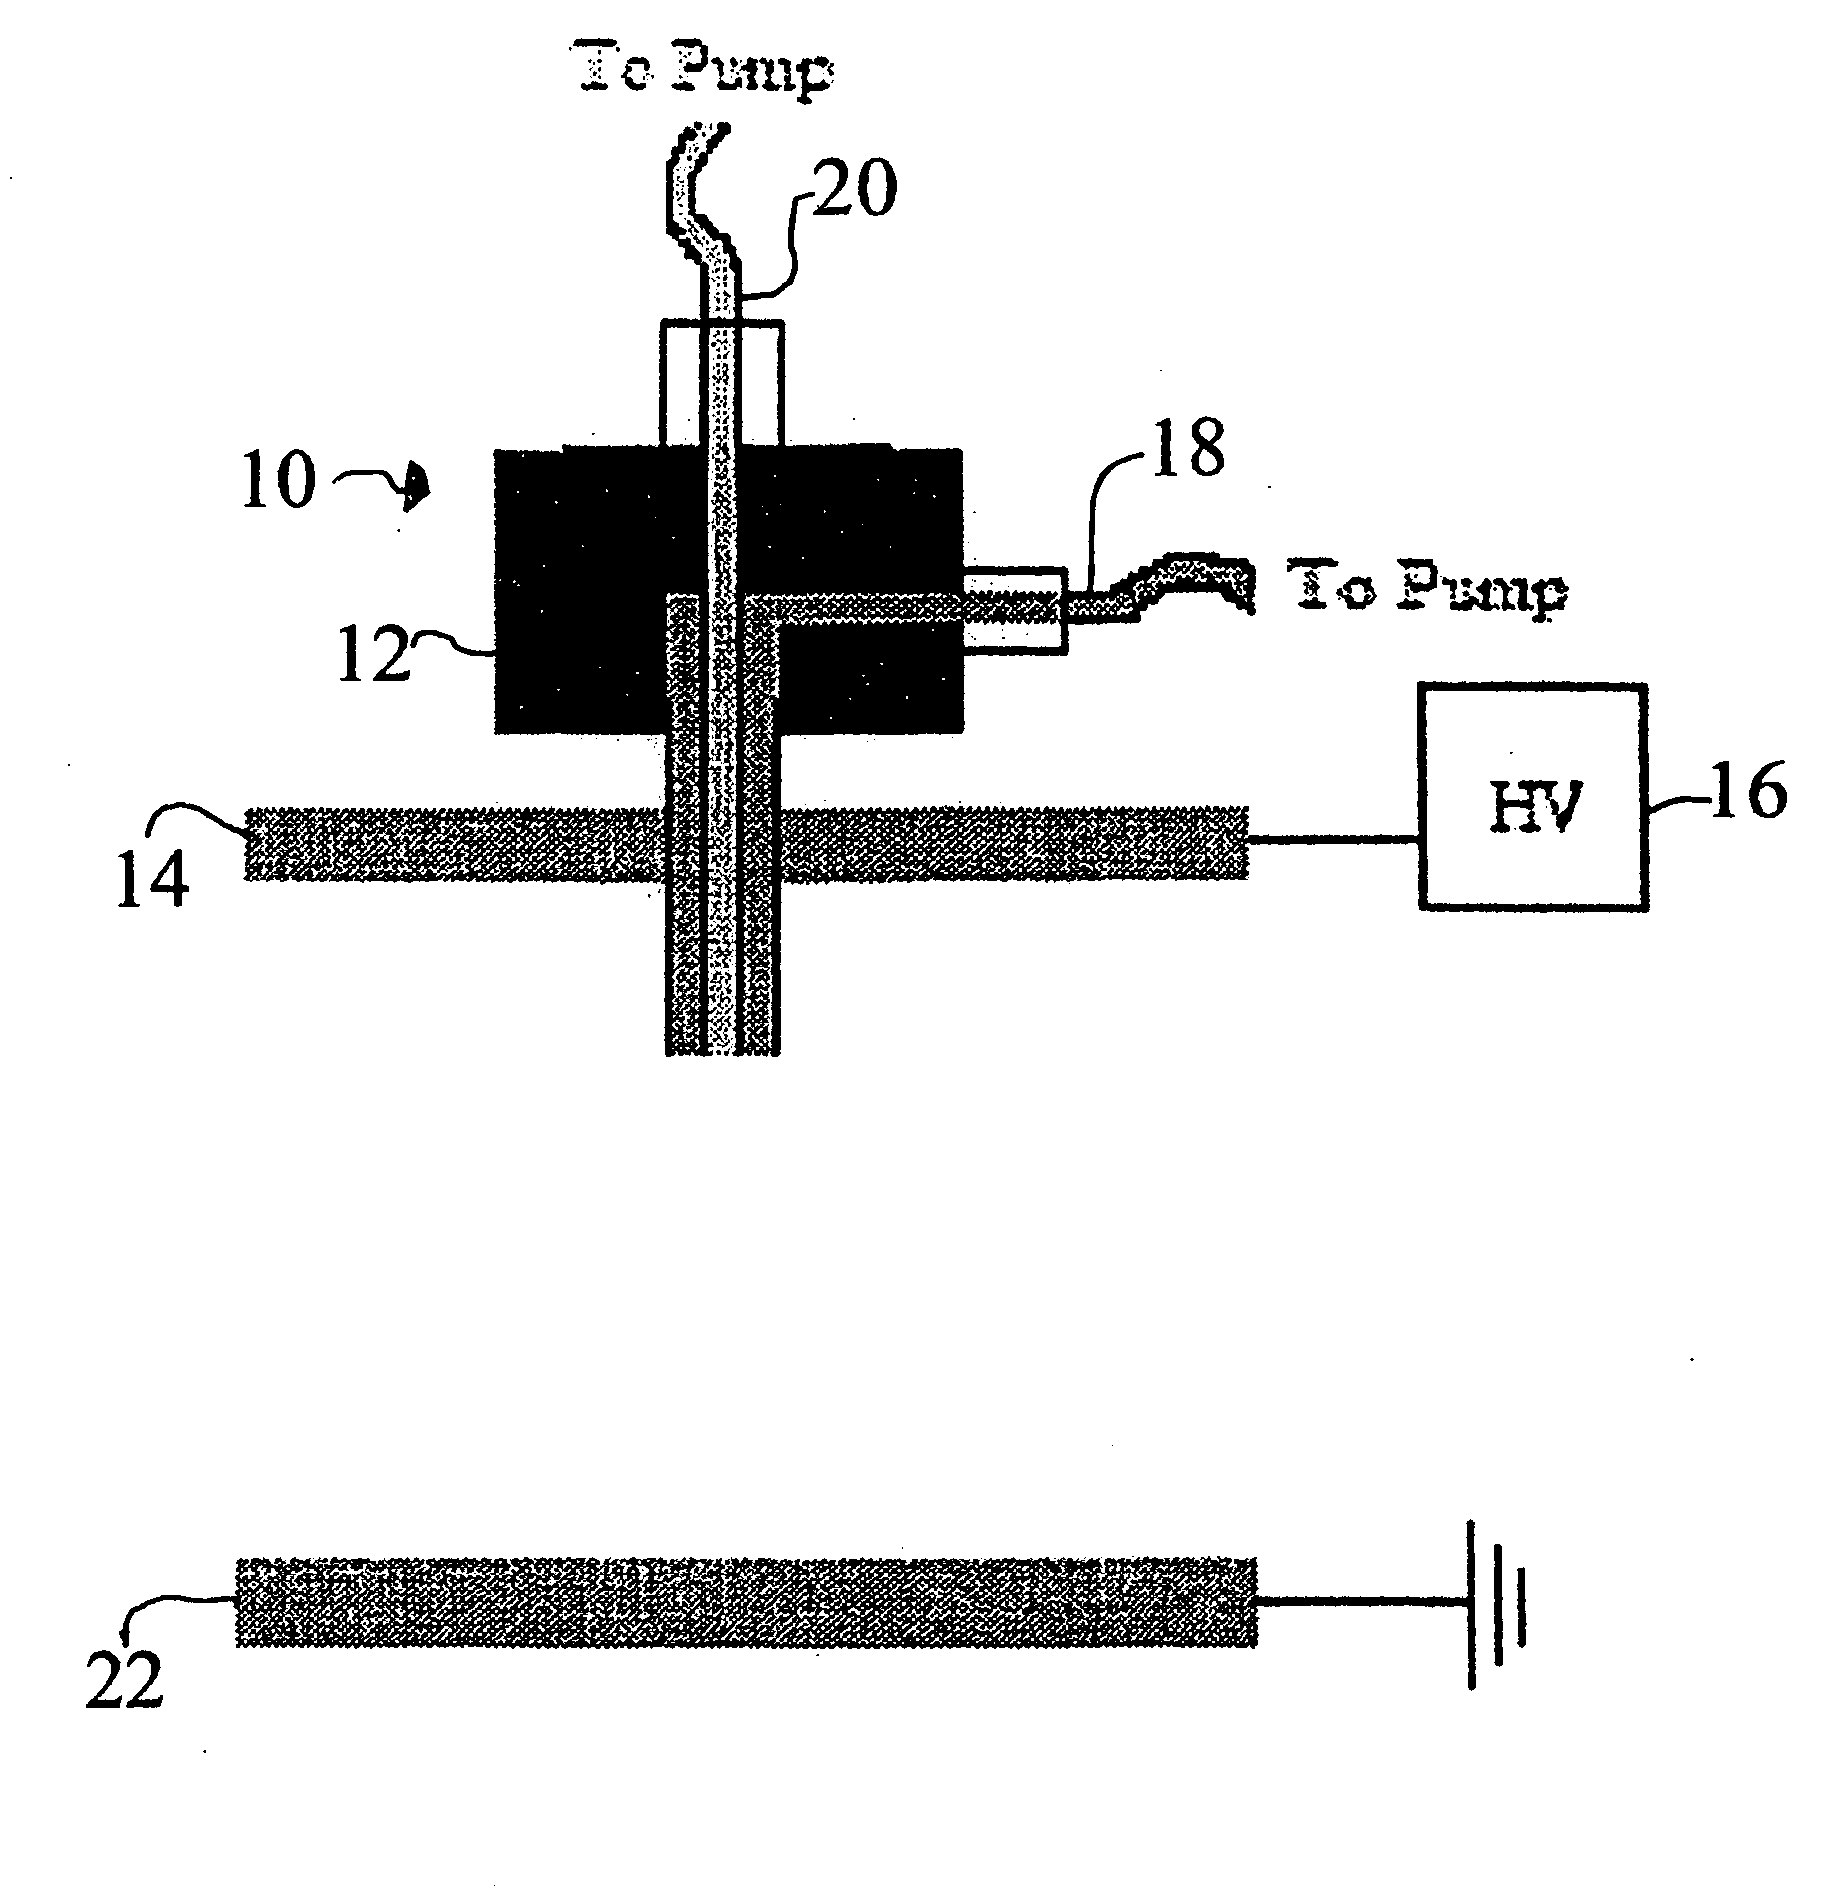 Production of submicron diameter fibers by two-fluid electrospinning process